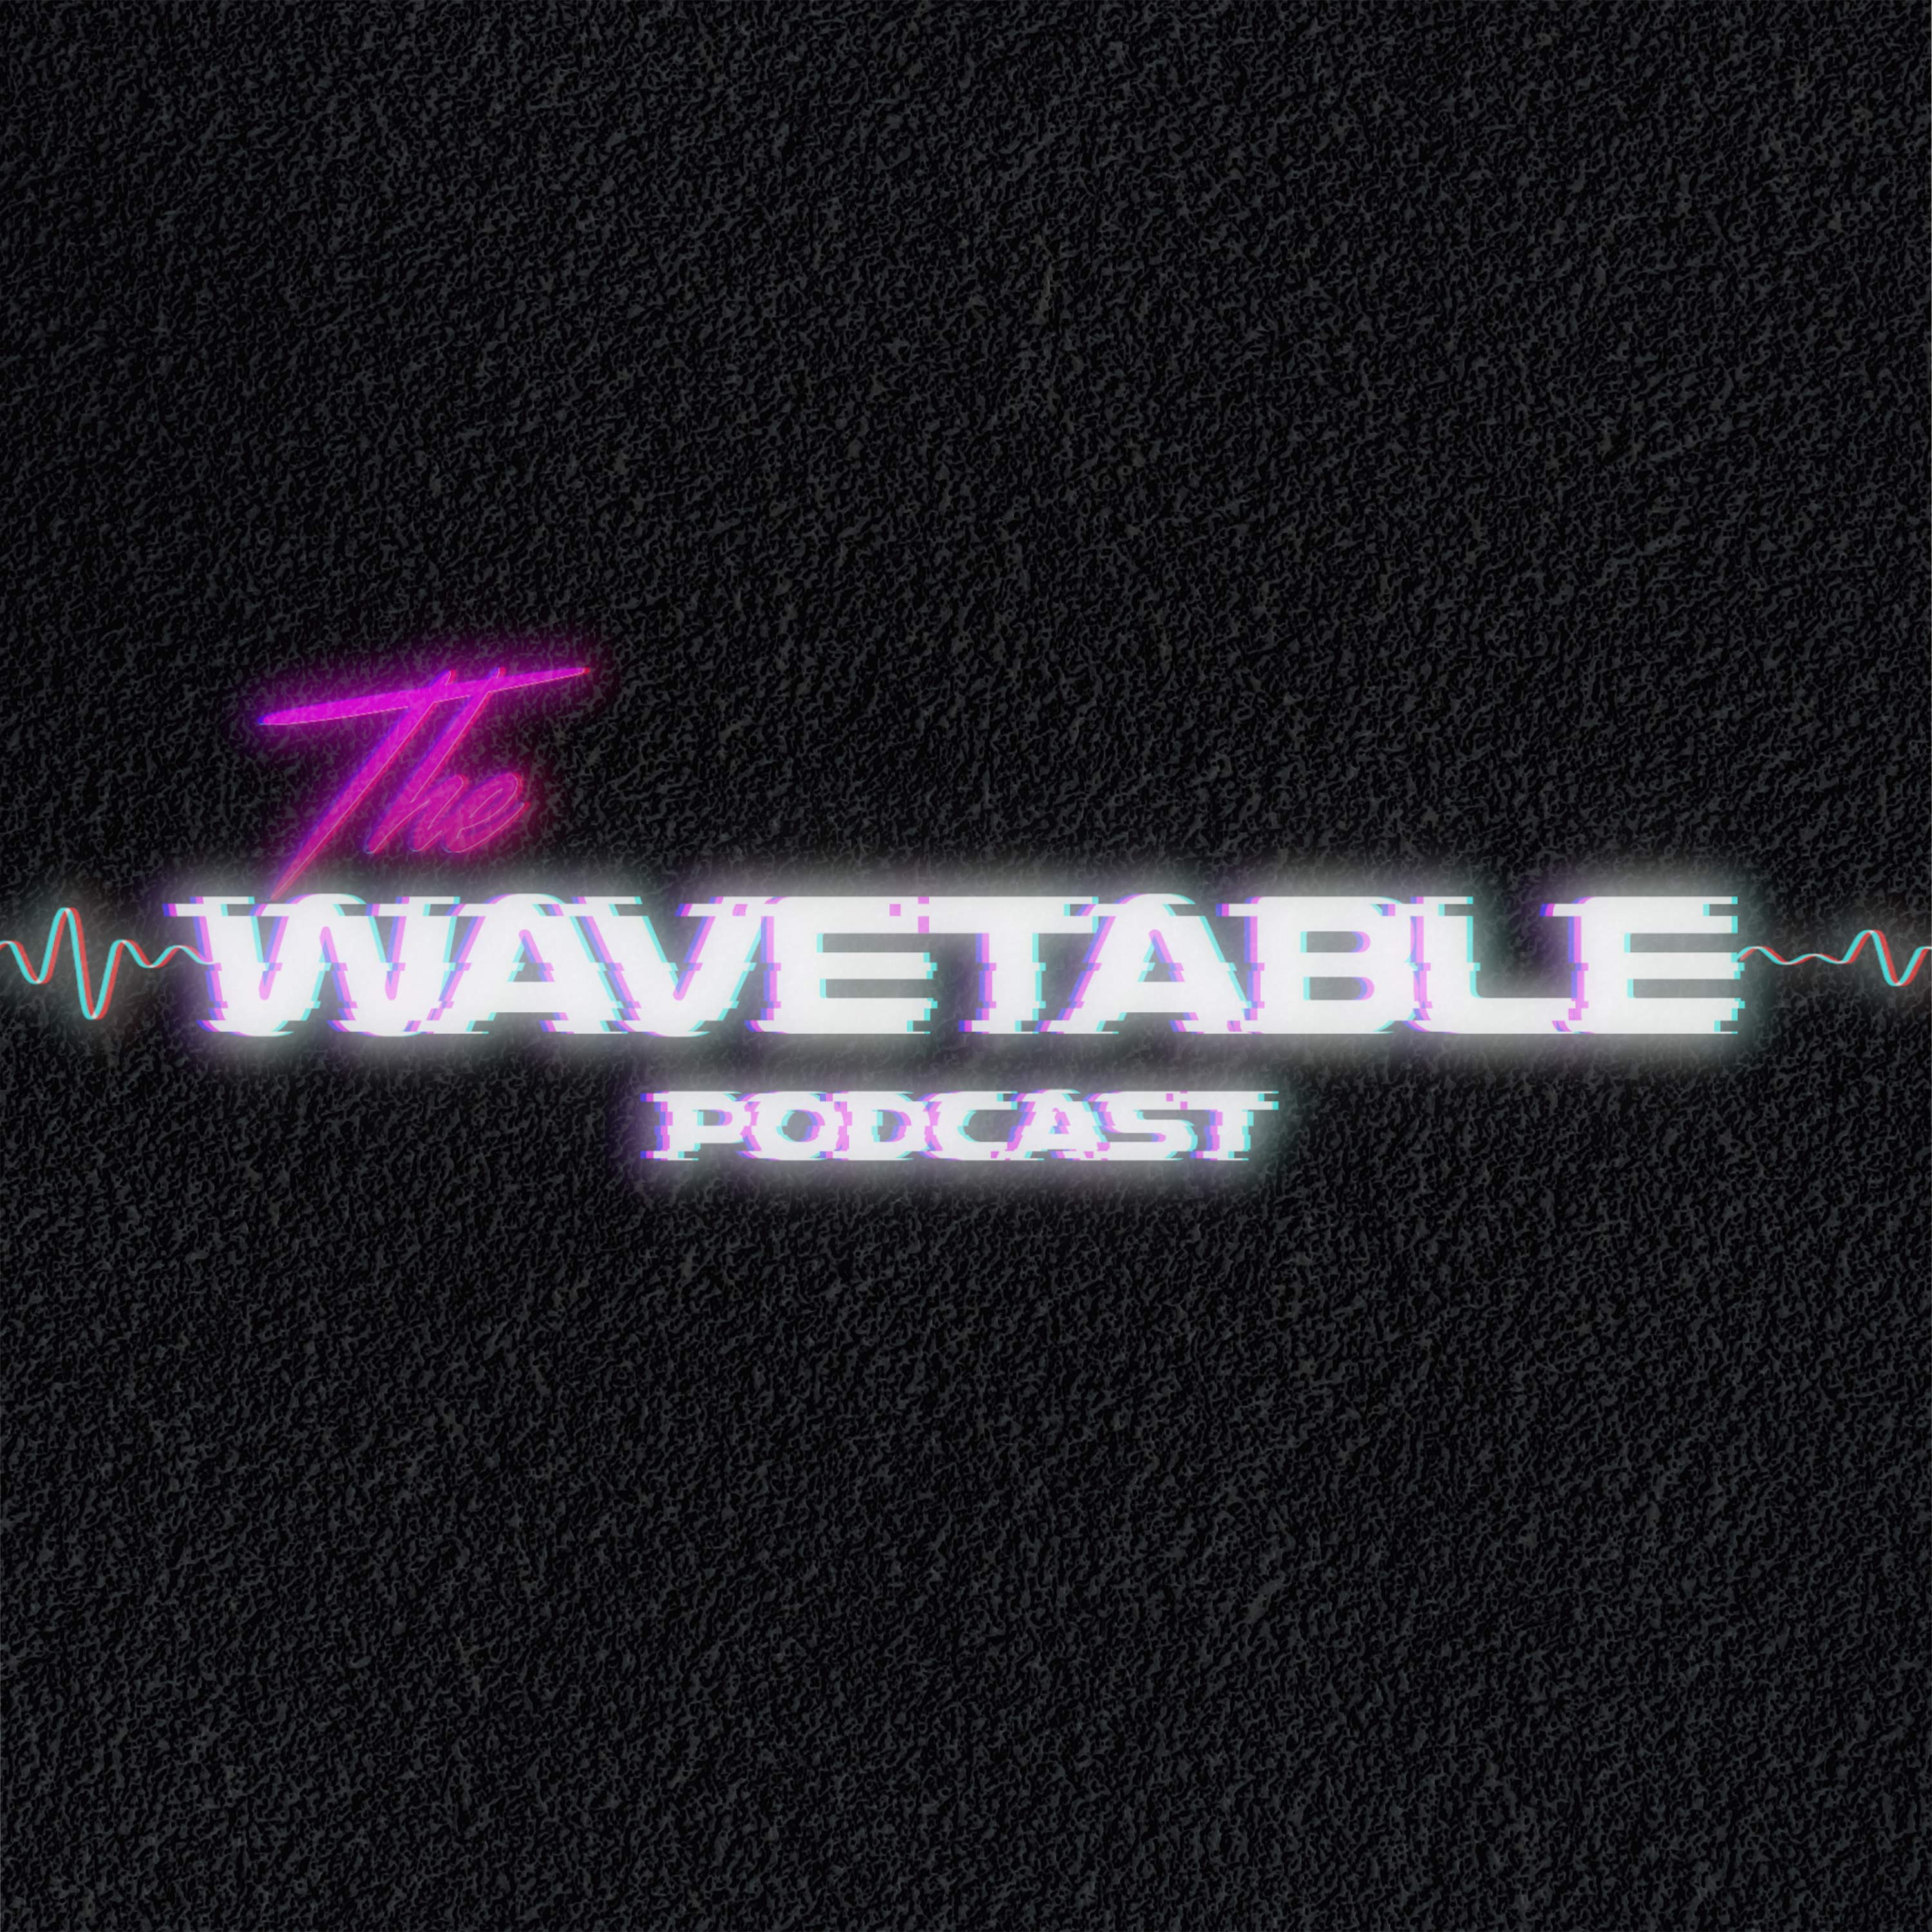 The Wavetable Podcast